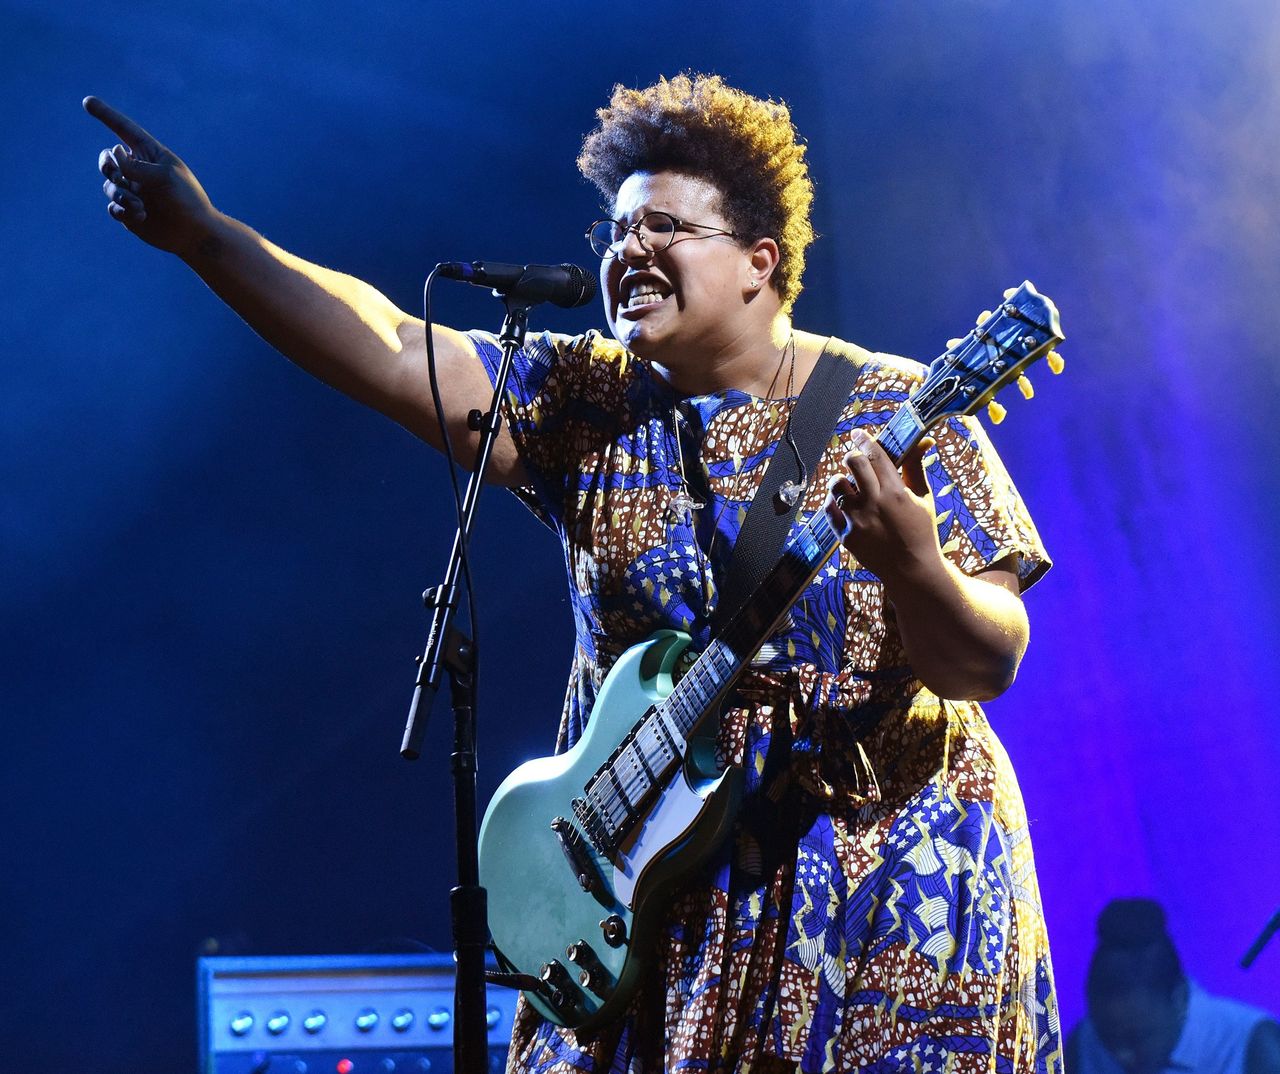 Brittany Howard performs during an Alabama Shakes show at a 2016 music festival.